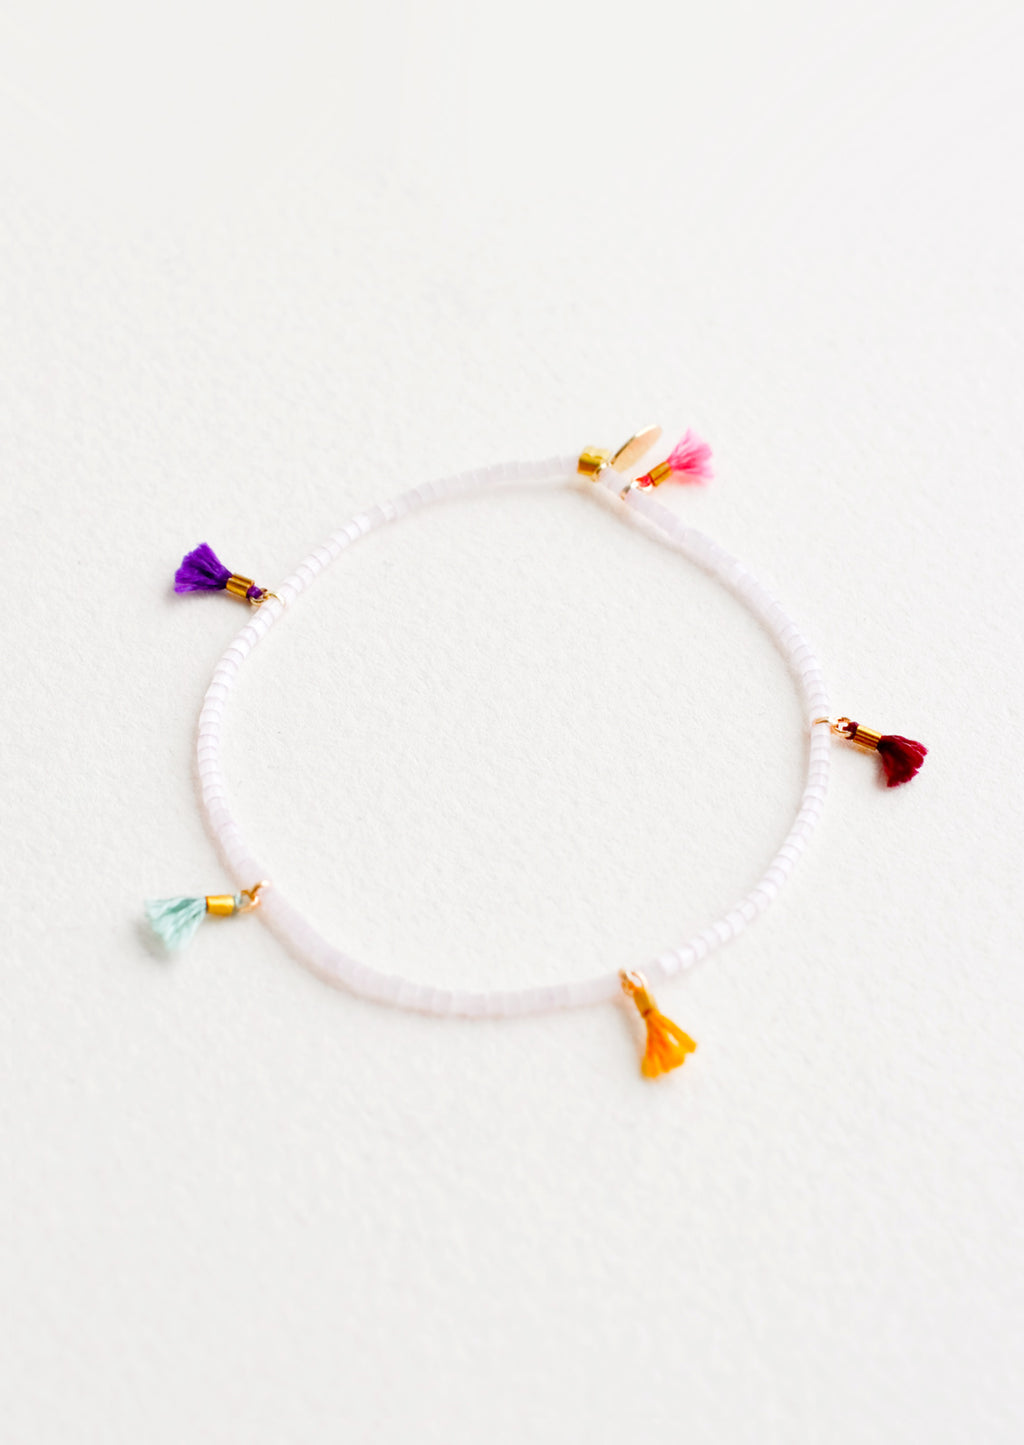 Rose Ice: Bracelet featuring white beads interspersed with 5 small multicolor string tassels on an elastic cord.